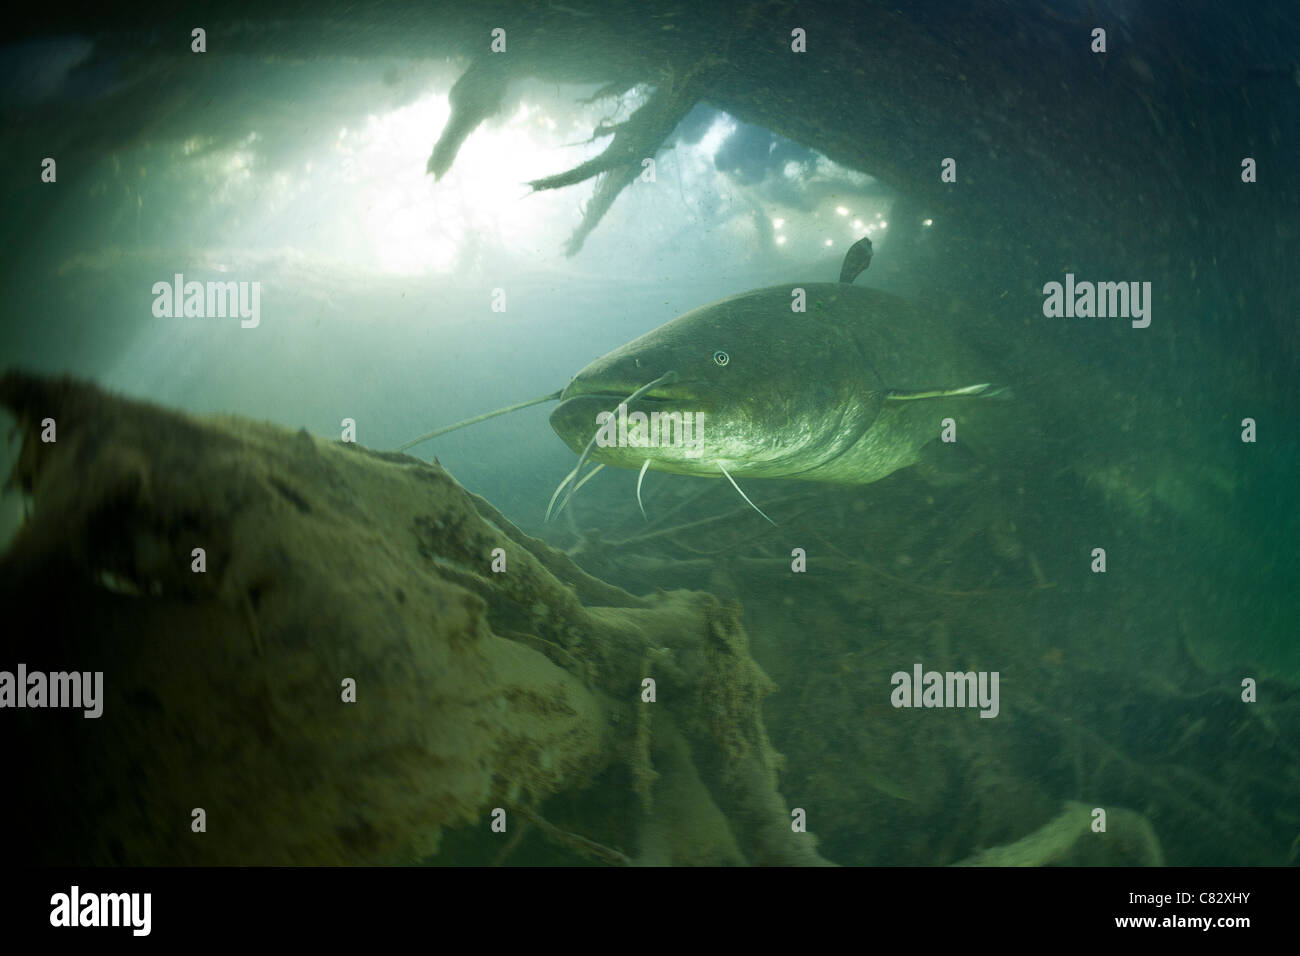 A Wels catfish (Silurus glanis) in the wild. That specimen measures nearly 8.2 ft and weighs 220 lbs or so. Stock Photo